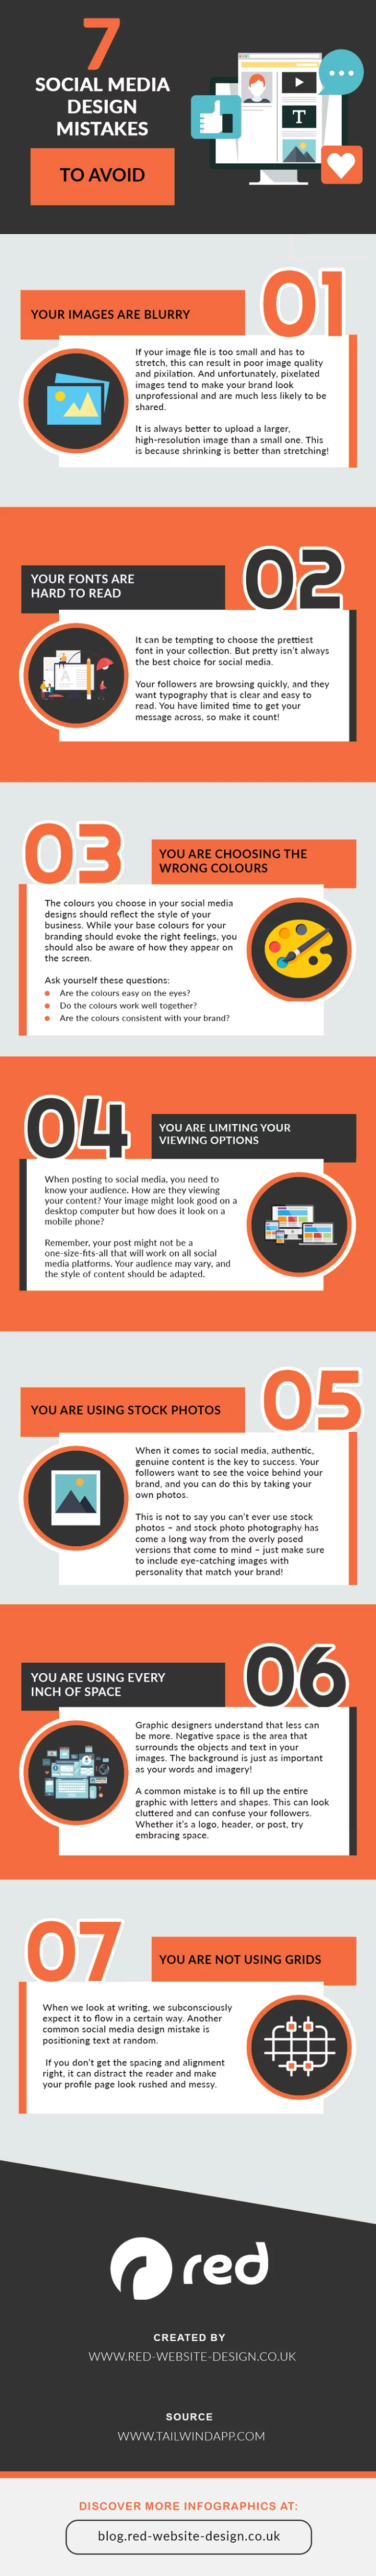 7 social media design mistakes that all marketers need to avoid infographic